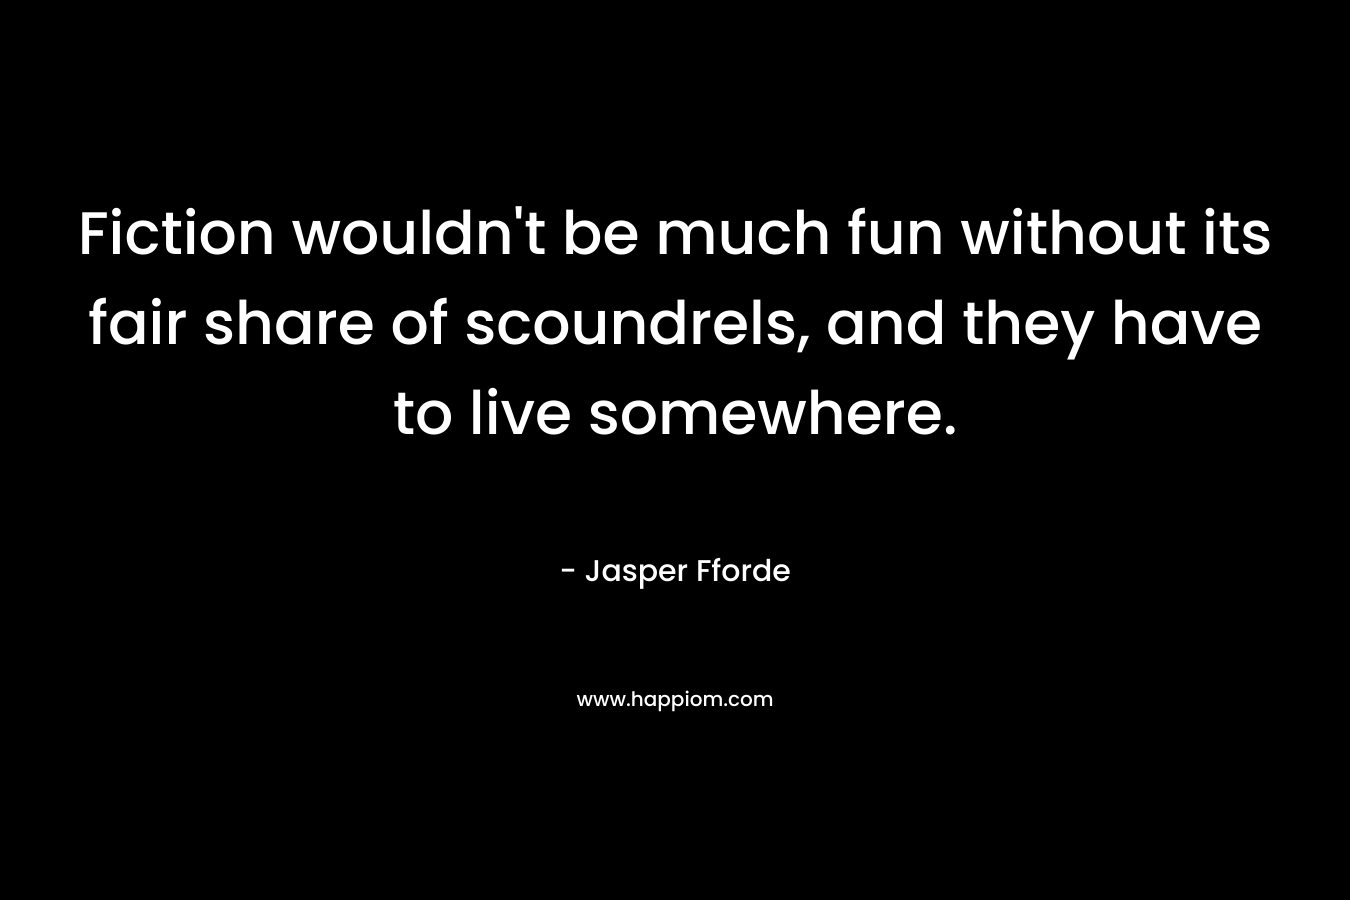 Fiction wouldn’t be much fun without its fair share of scoundrels, and they have to live somewhere. – Jasper Fforde